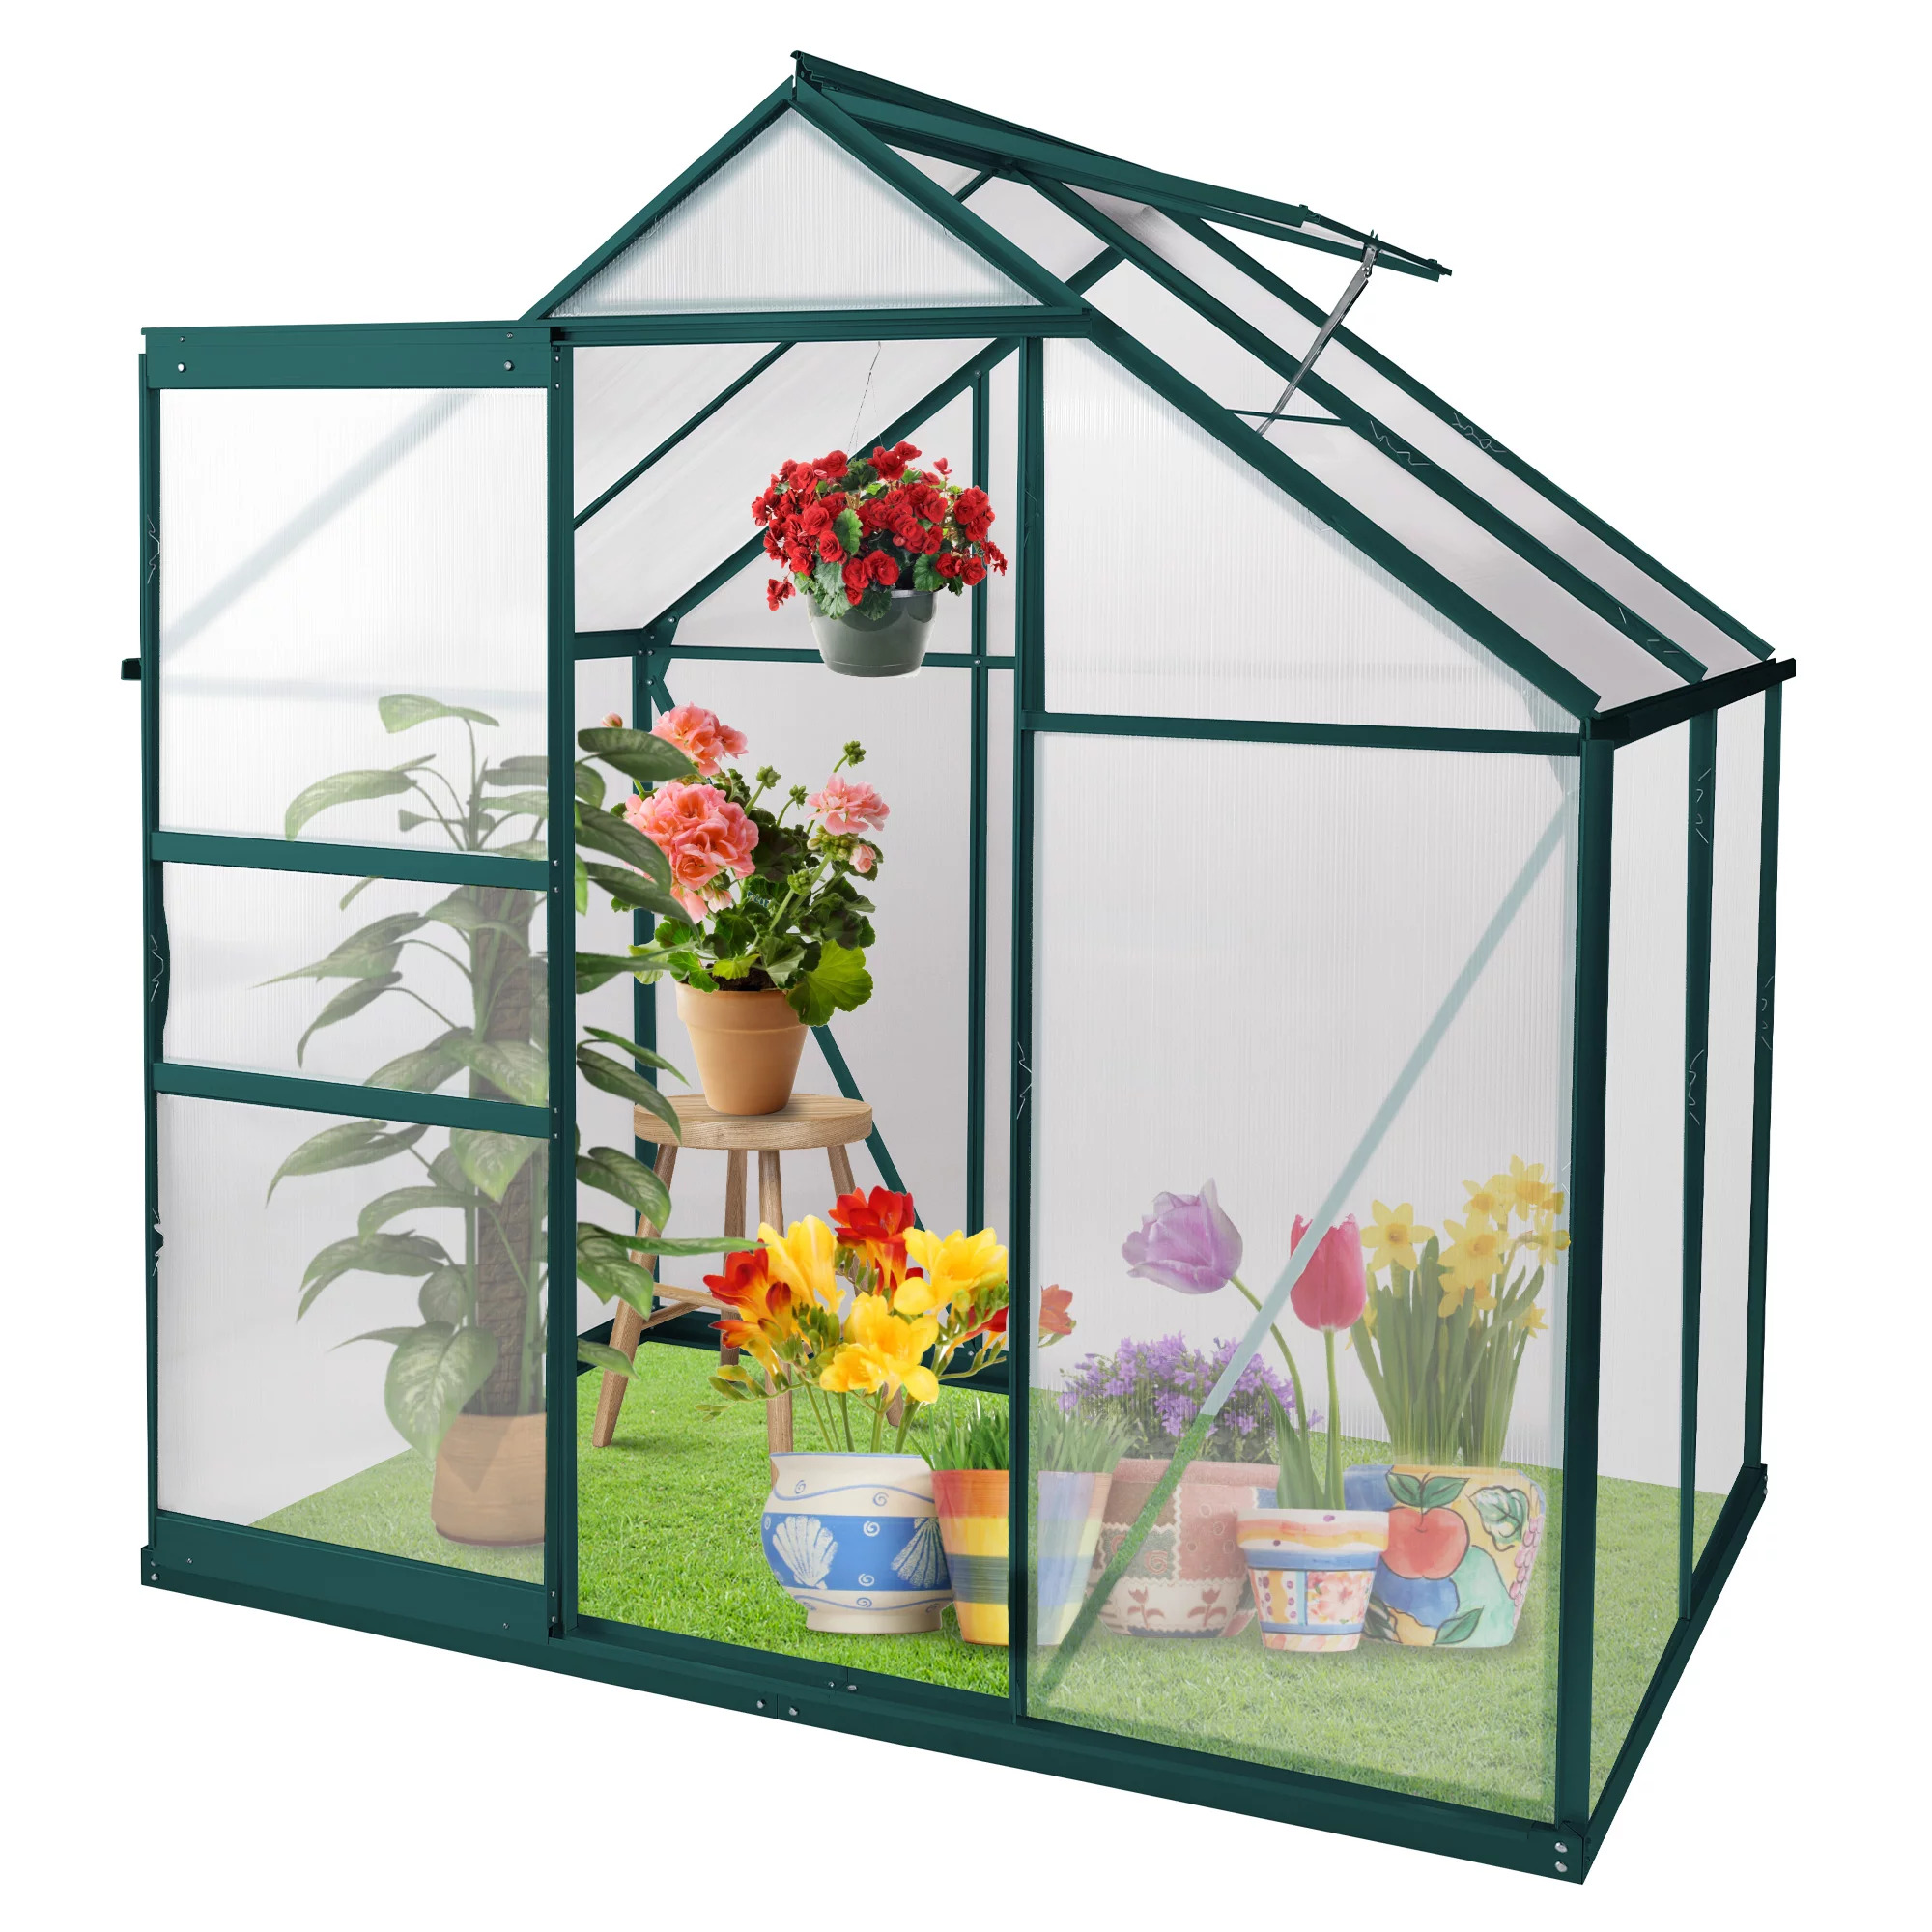 6'X 4' Walk-In Greenhouse with Roof Vent and Rain Gutter for Outside,Polycarbonate Aluminum Heavy Duty Greenhouse for Flowers, Vegetables, Plants Backyard Garden - image 1 of 7